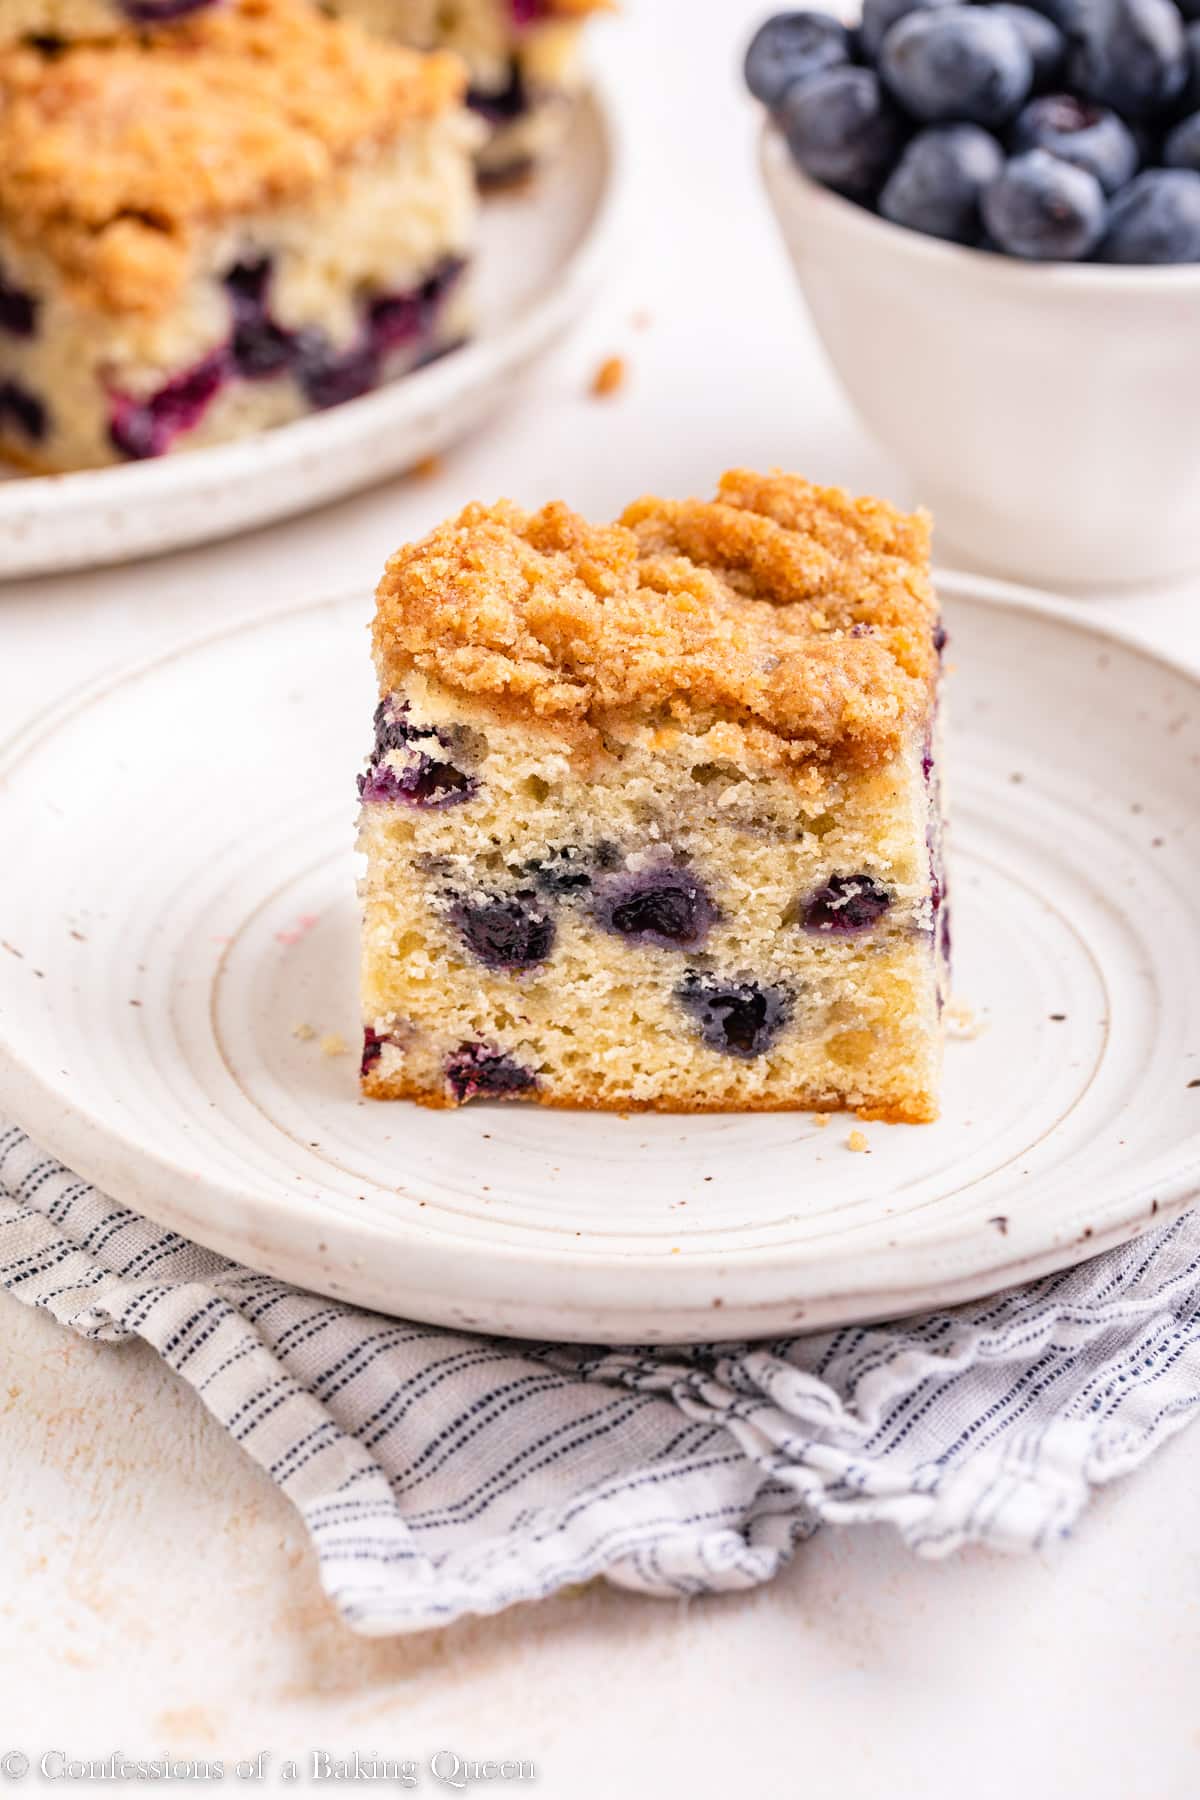 A slice of blueberry coffee cake on a plate near a bowl of fresh blueberries.